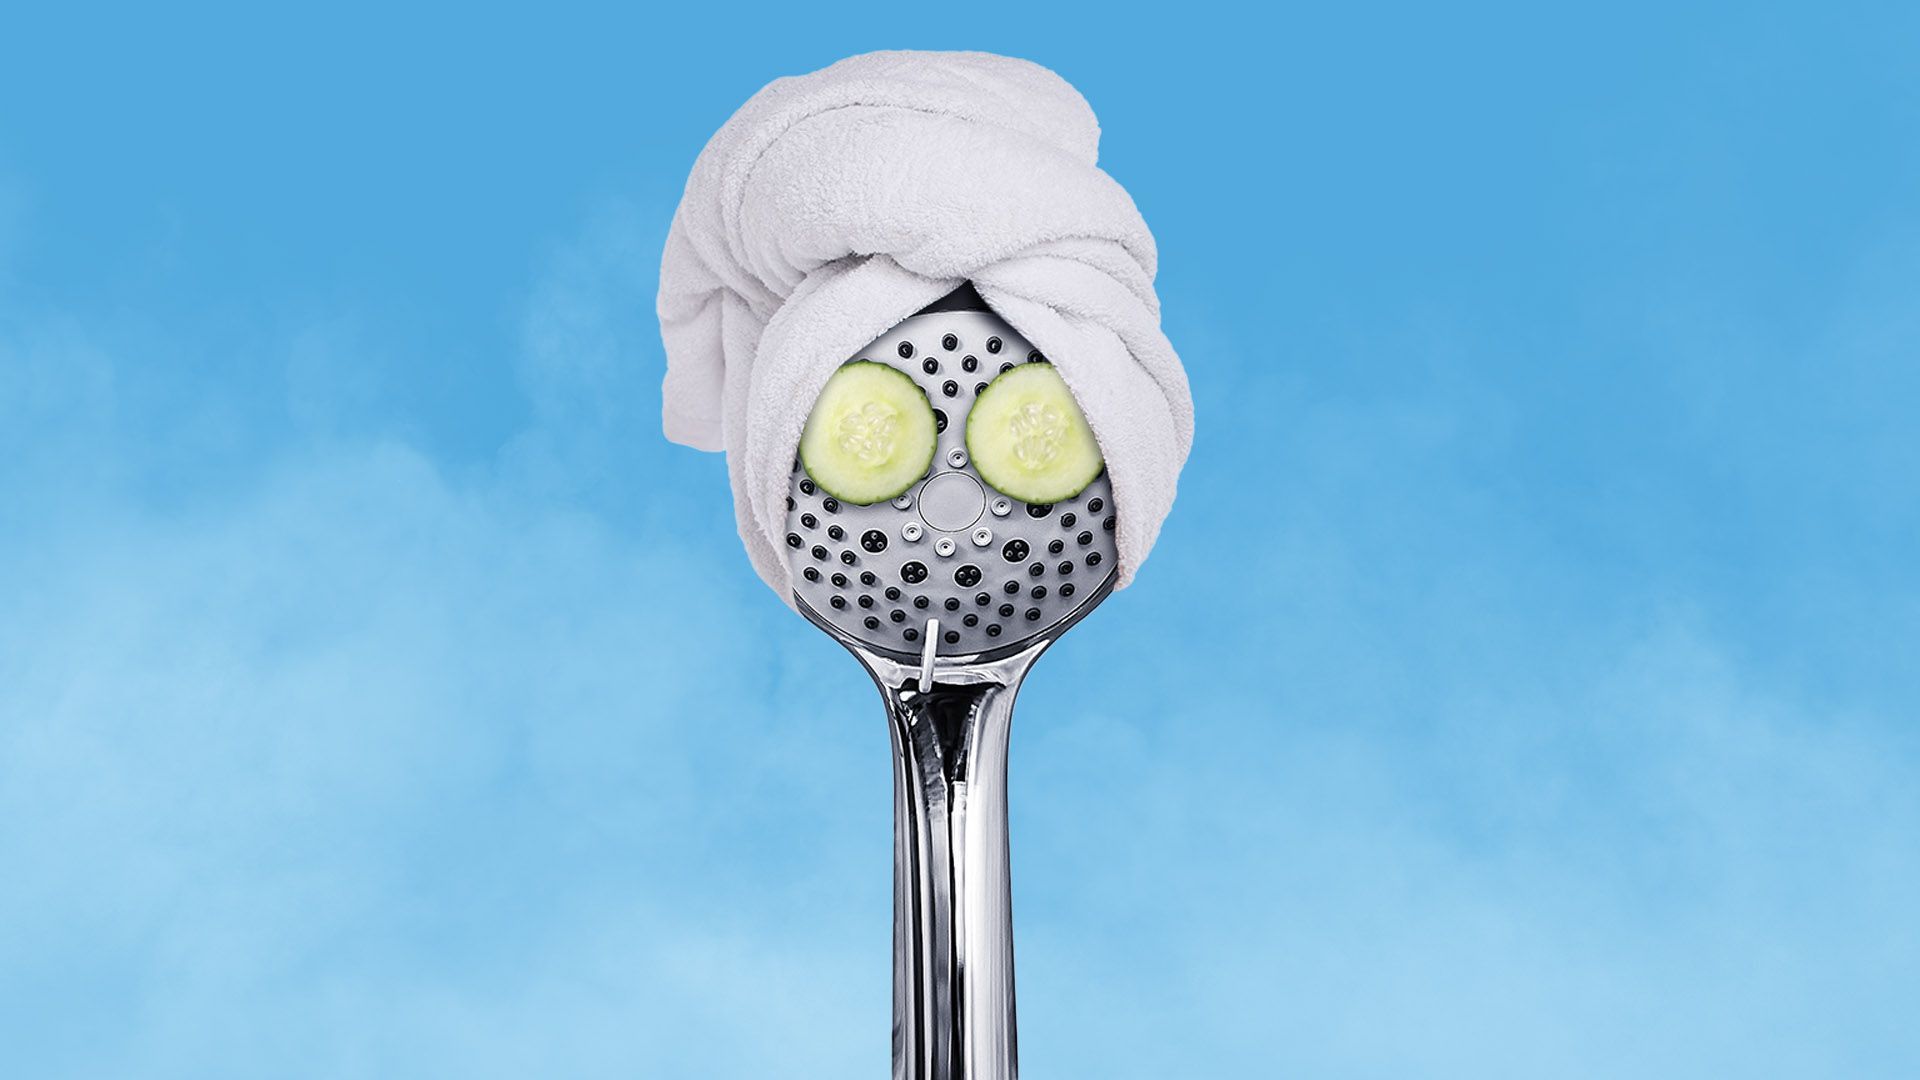 Illustration of a shower head wearing a towel and cucumber slices as if in a spa